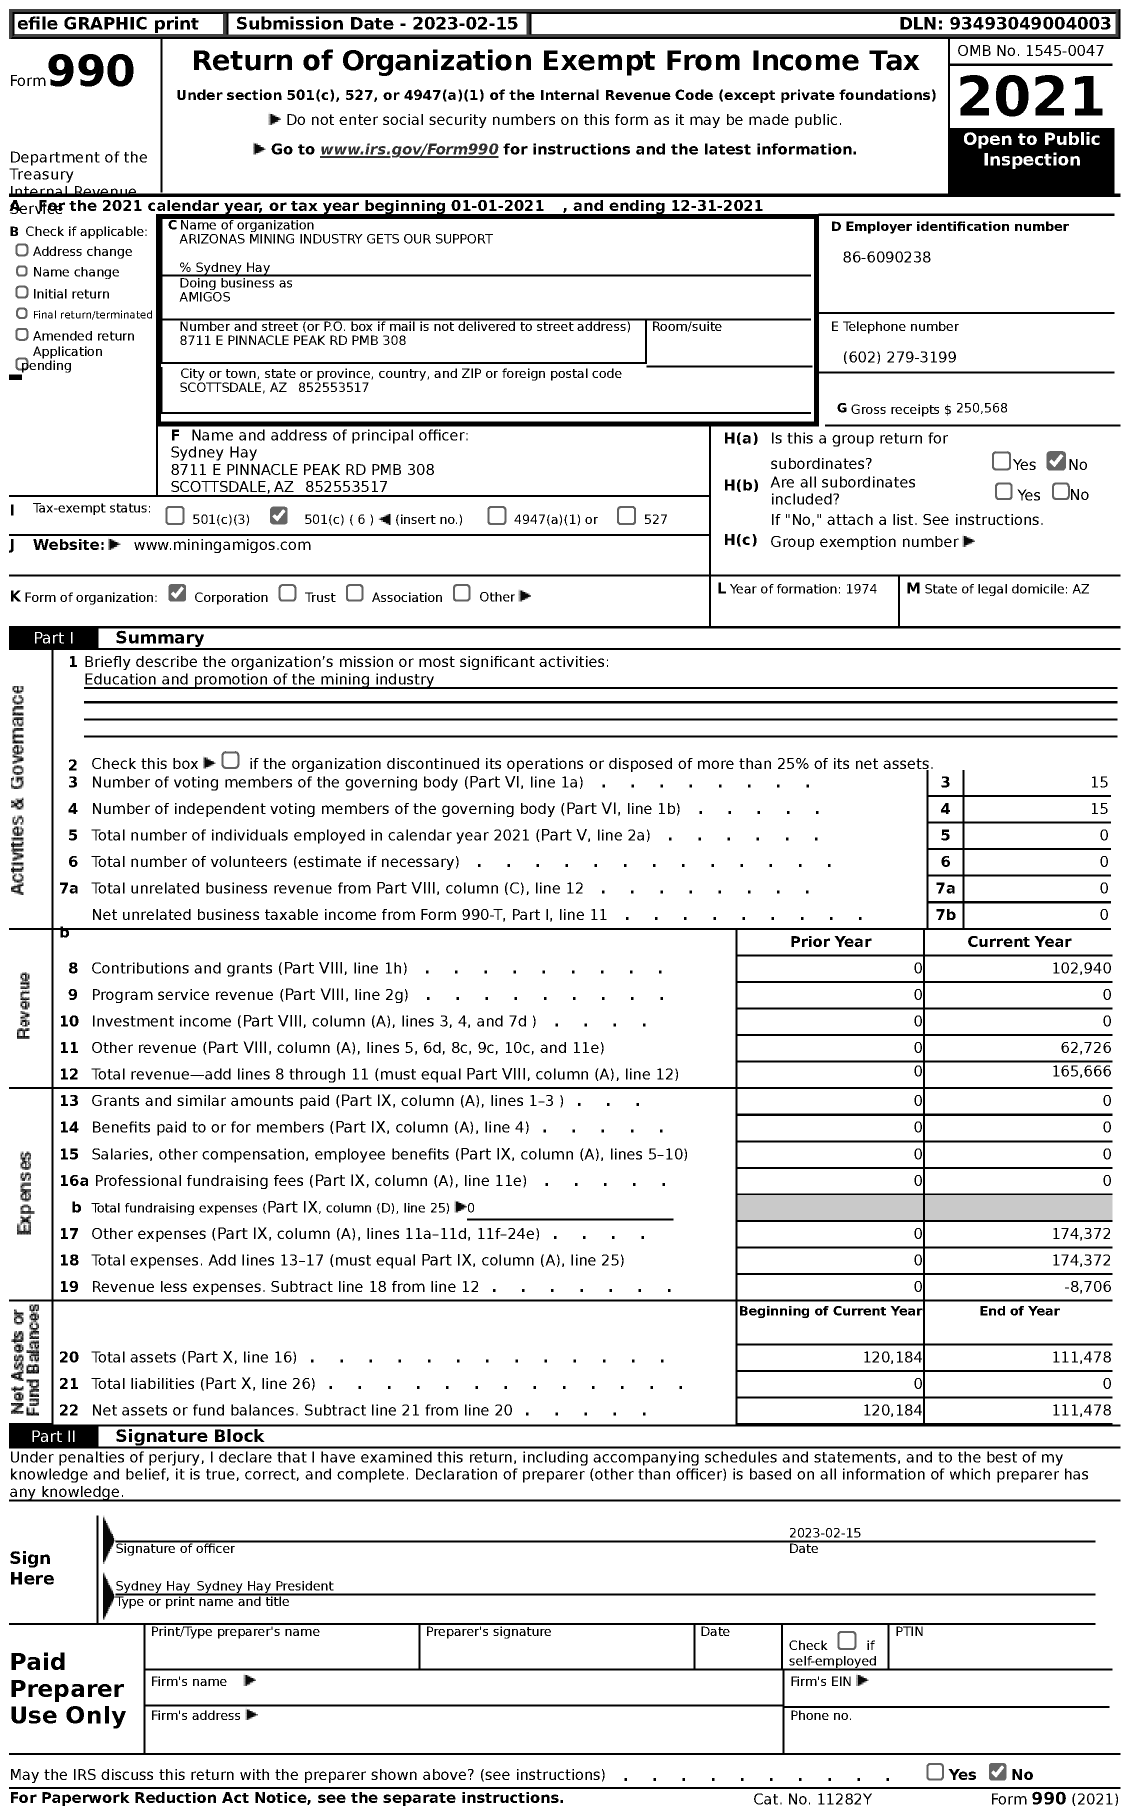 Image of first page of 2021 Form 990 for Arizona Mining and Industry Get Our Support (AMIGOS)